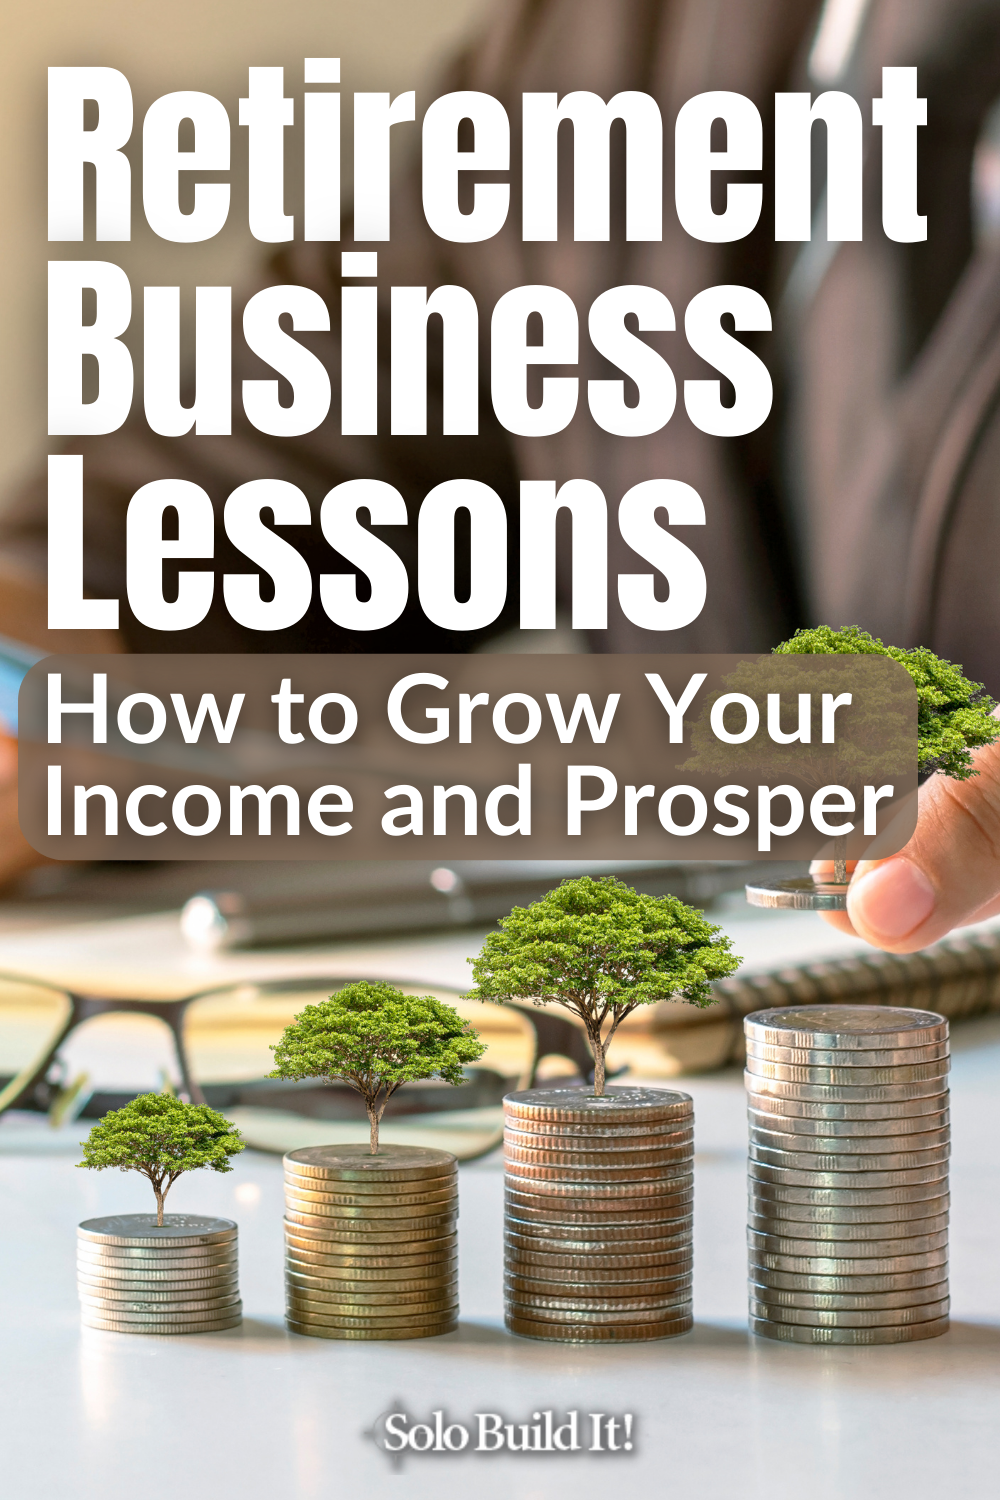 Retirement Business Lessons:<br>How to Grow Your Income and Prosper